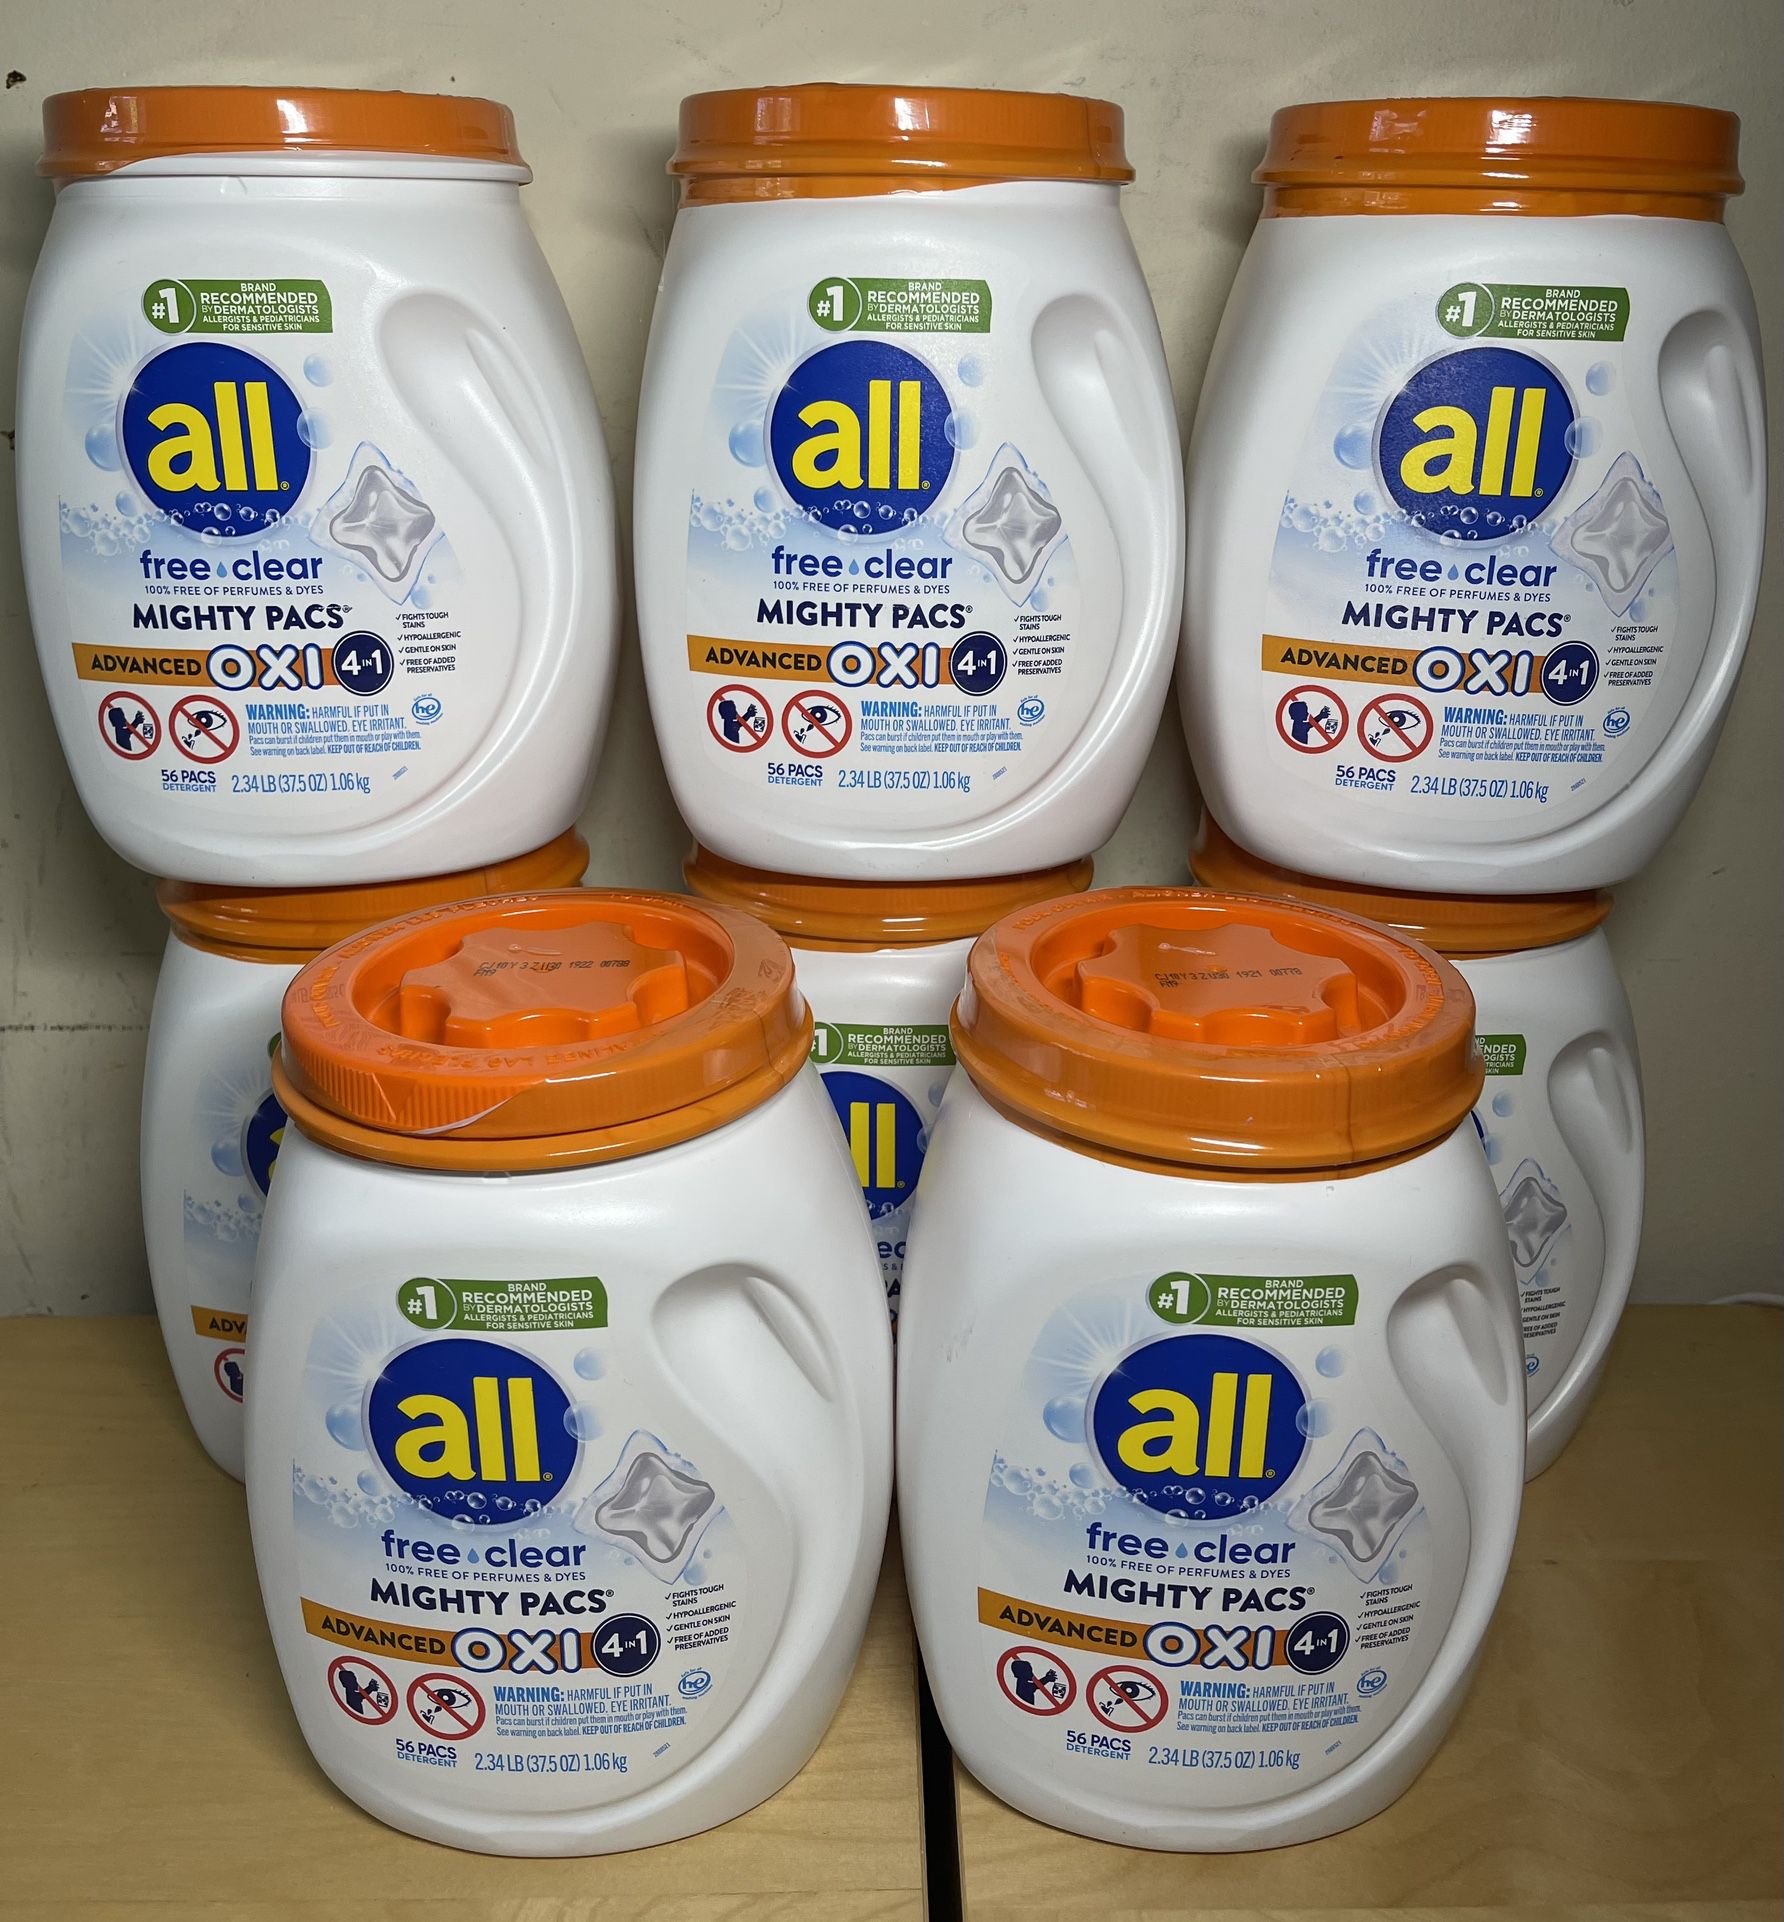 NEW All Laundry Detergent Pacs, Mighty Pacs with OXI Stain Removers and Whiteners, 56 Count